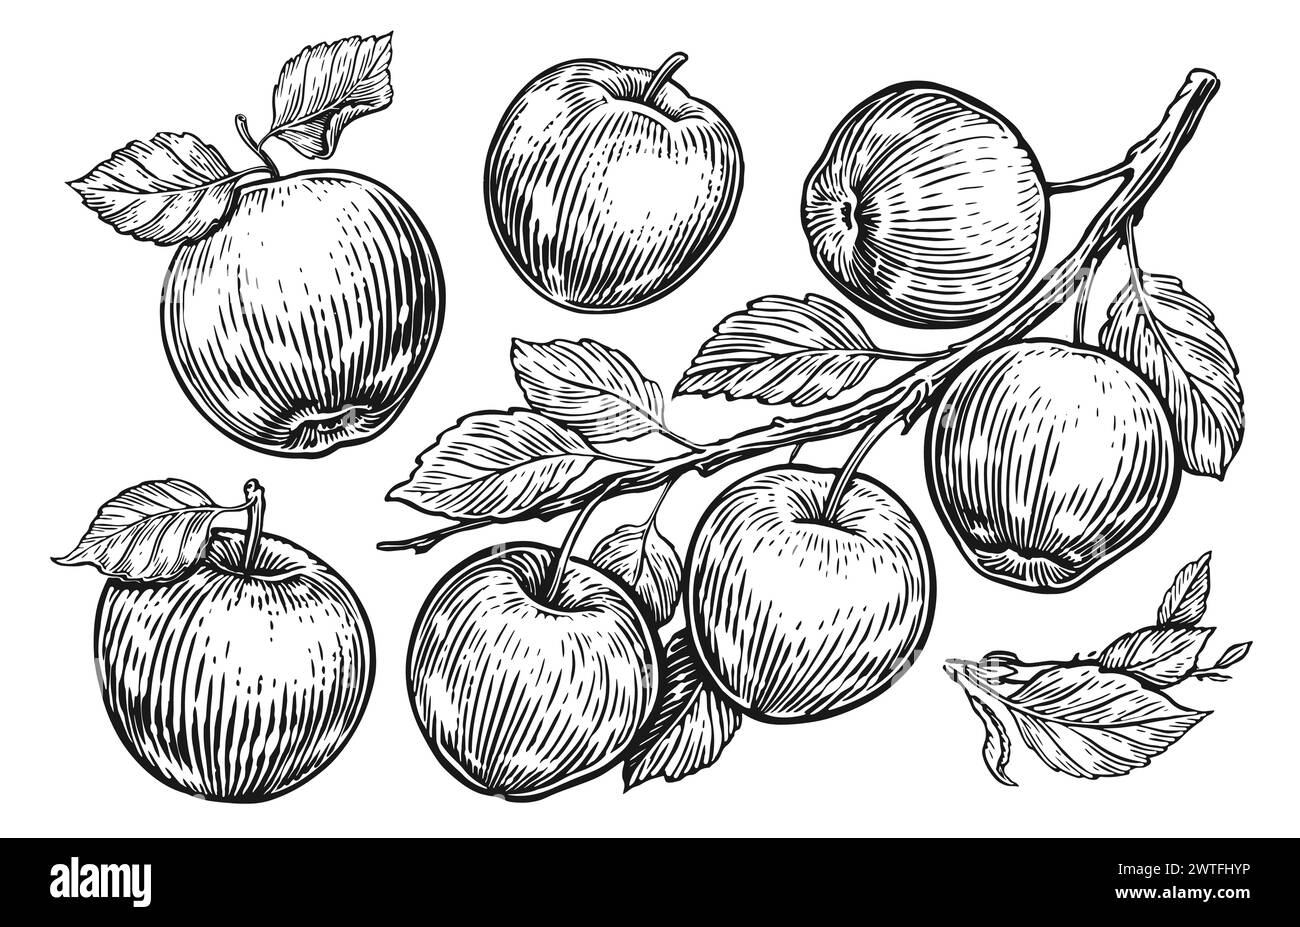 Apple fruit, branch with leaves. Set of sketch apples. Hand drawn engraving style vector illustration Stock Vector